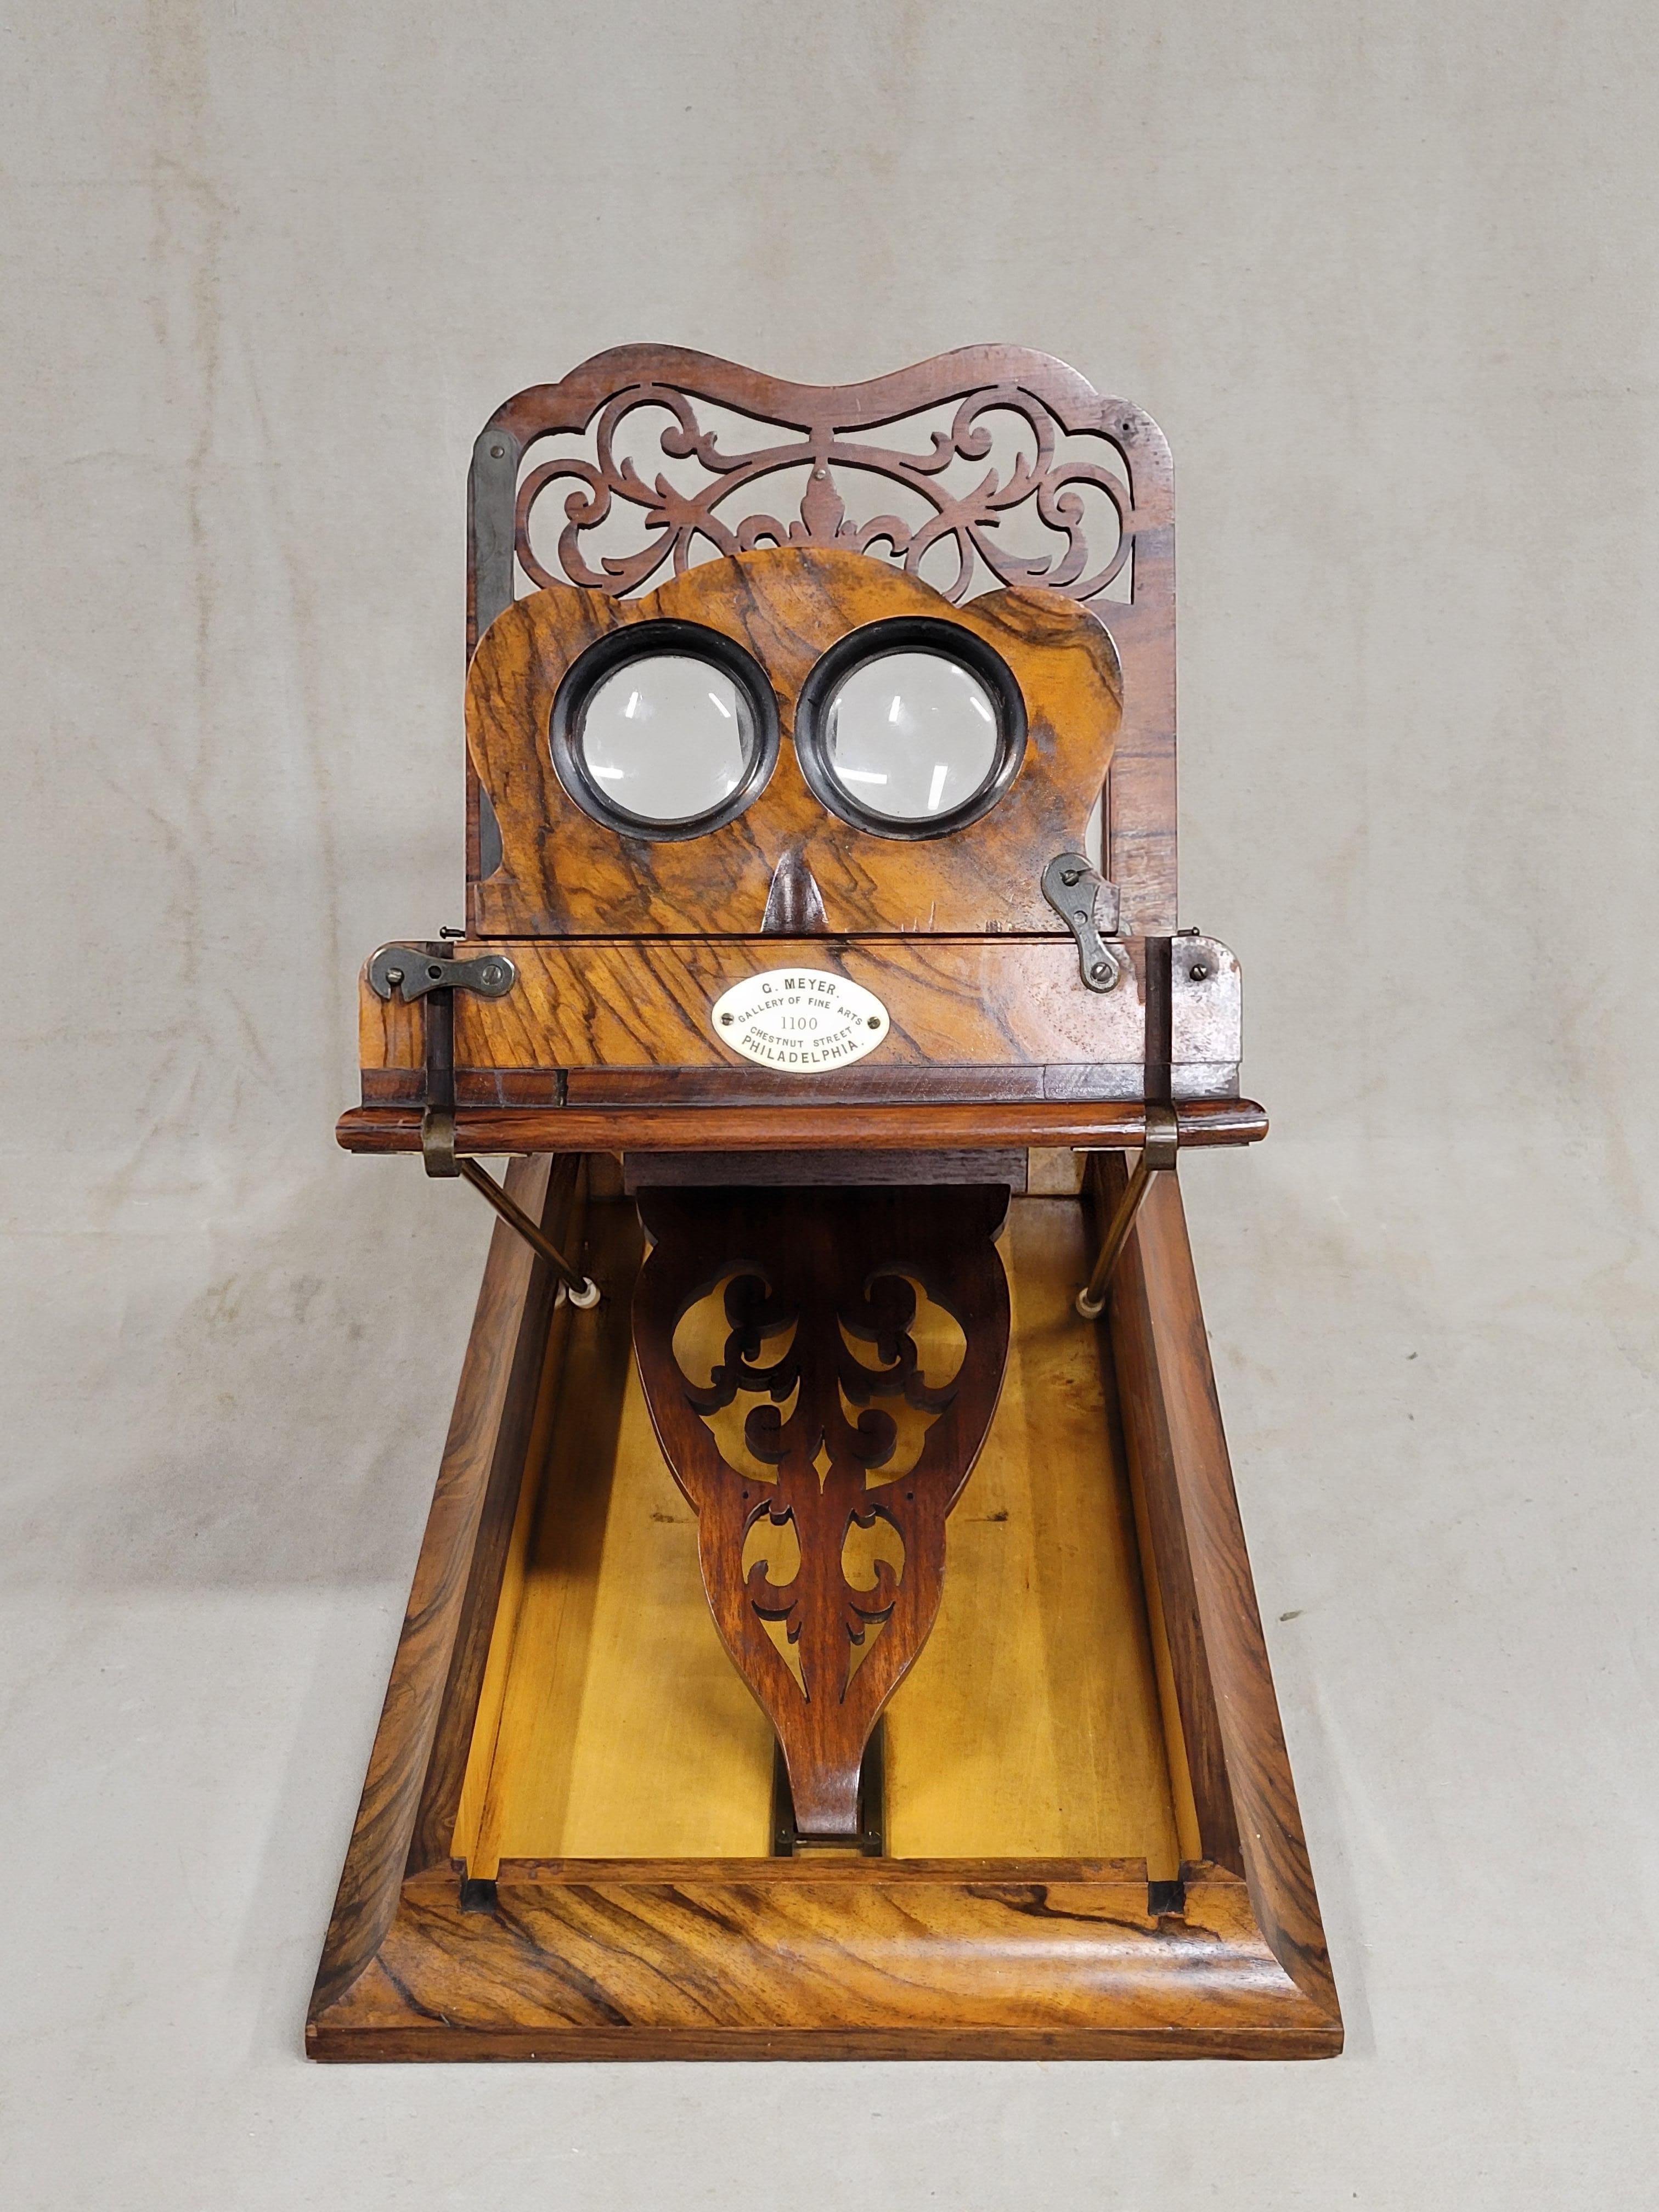 Antique Rosewood Folding Stereoscope Viewer - Philadelphia Gallery of Fine Arts In Good Condition For Sale In Centennial, CO